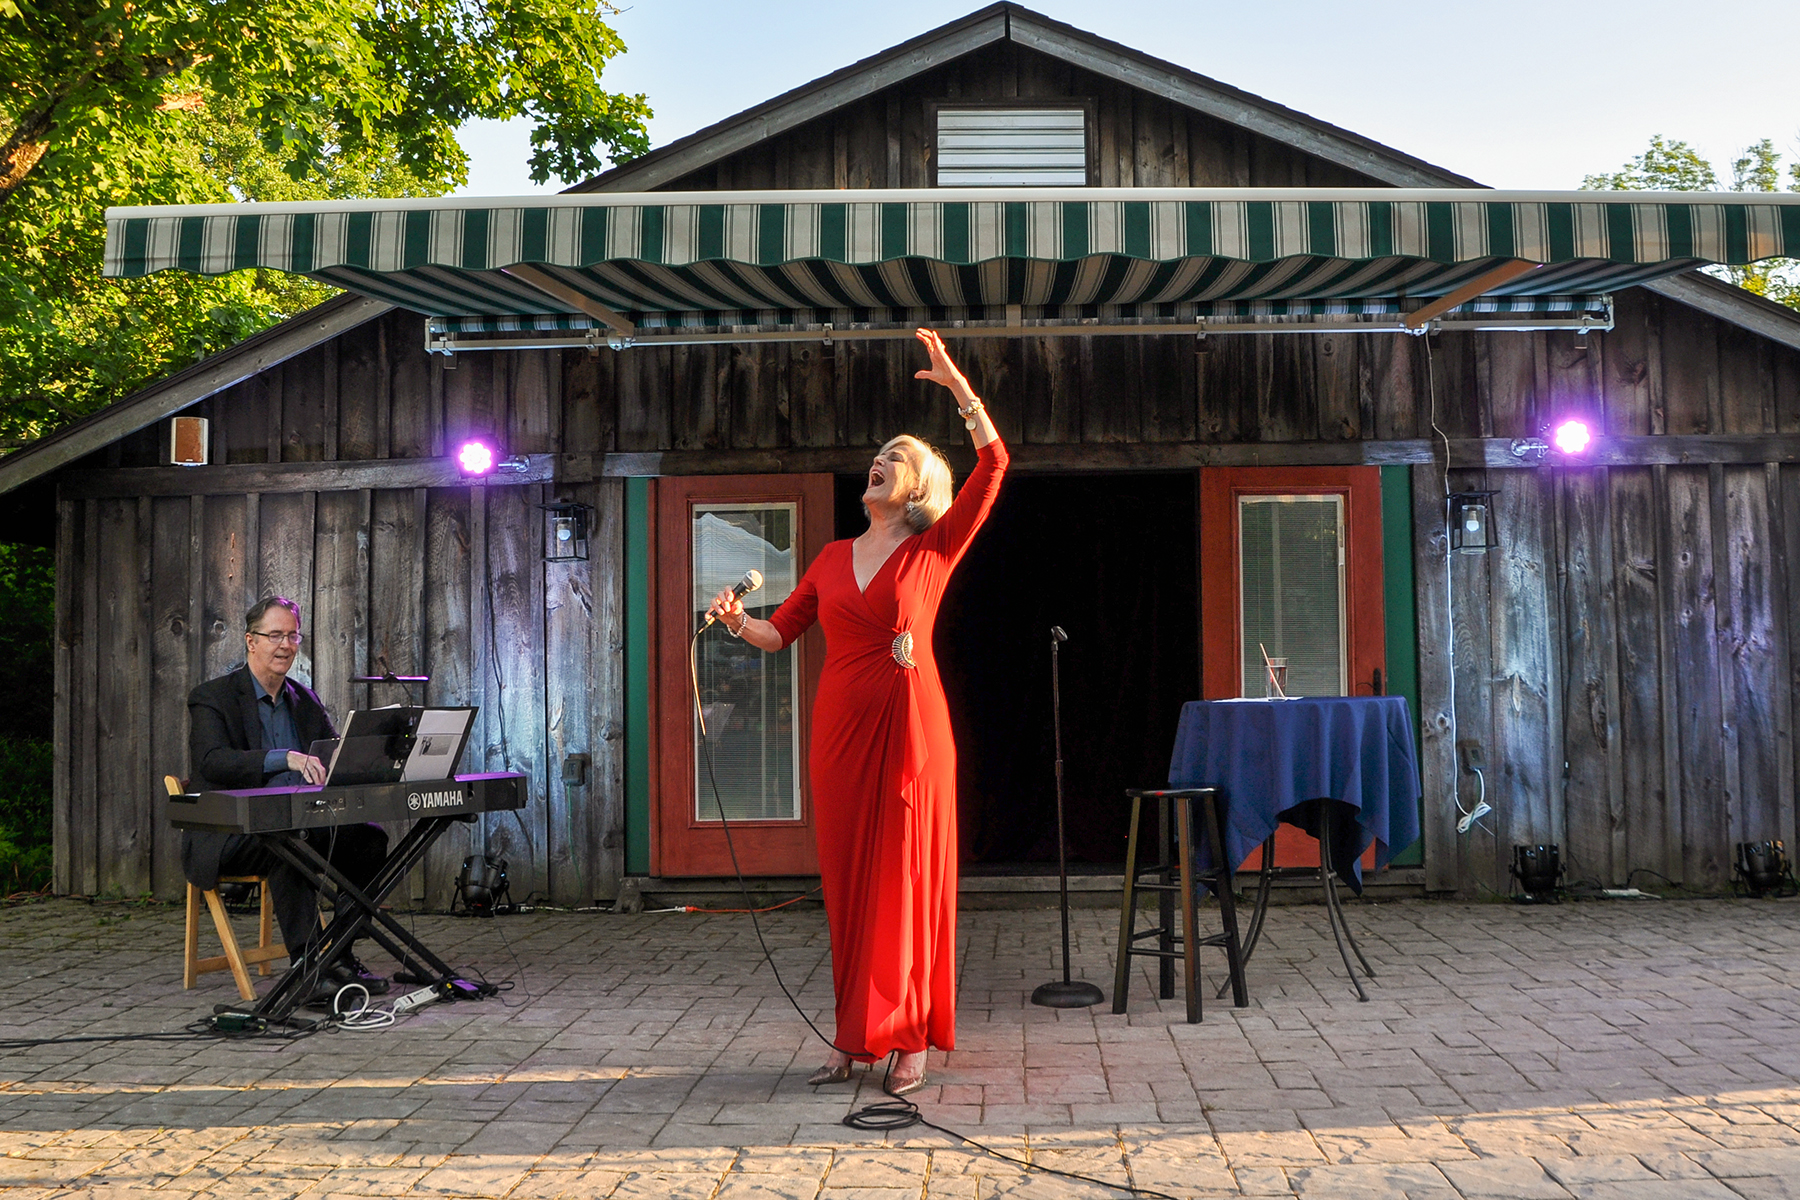 Sultry summer sounds under the stars mark a performance by singer Karen Mason at the musical cabaret on the grounds of the Forestburgh Playhouse. 